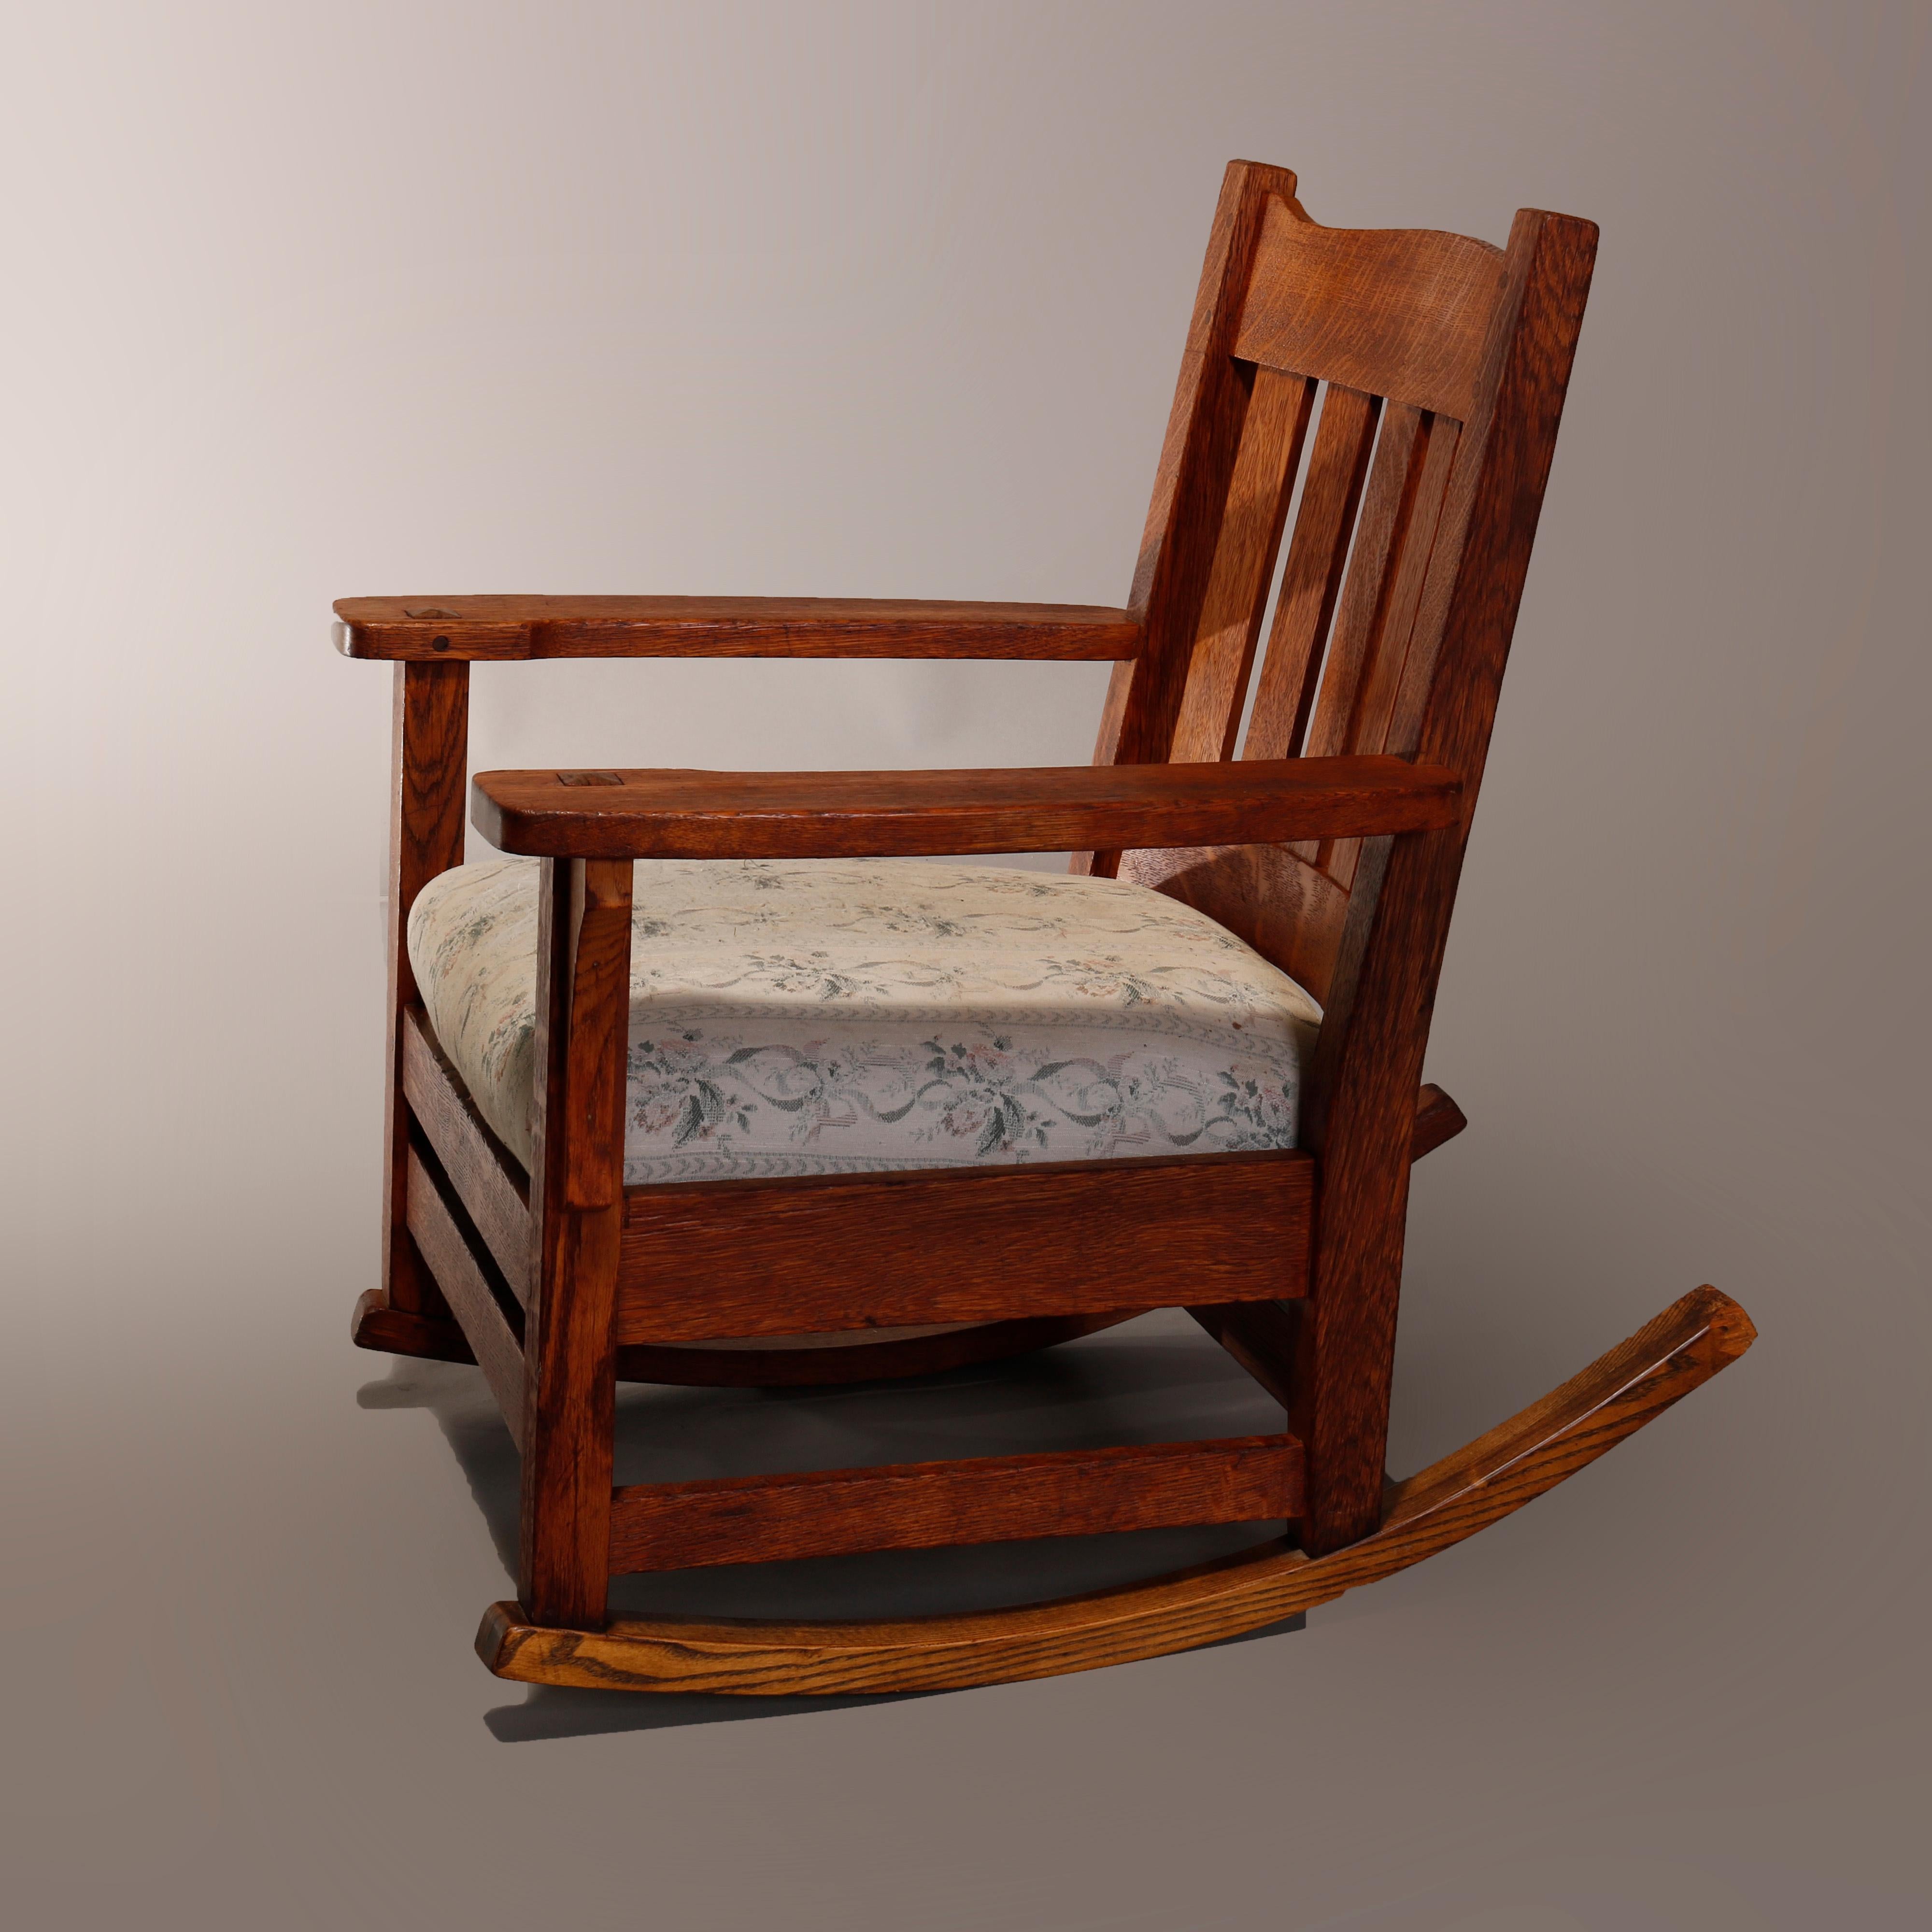 An antique Arts & Crafts Mission rocker in the manner of Stickley offers oak construction with shaped rail over slat back and cushioned seat, circa 1910.

Measures: 32.25